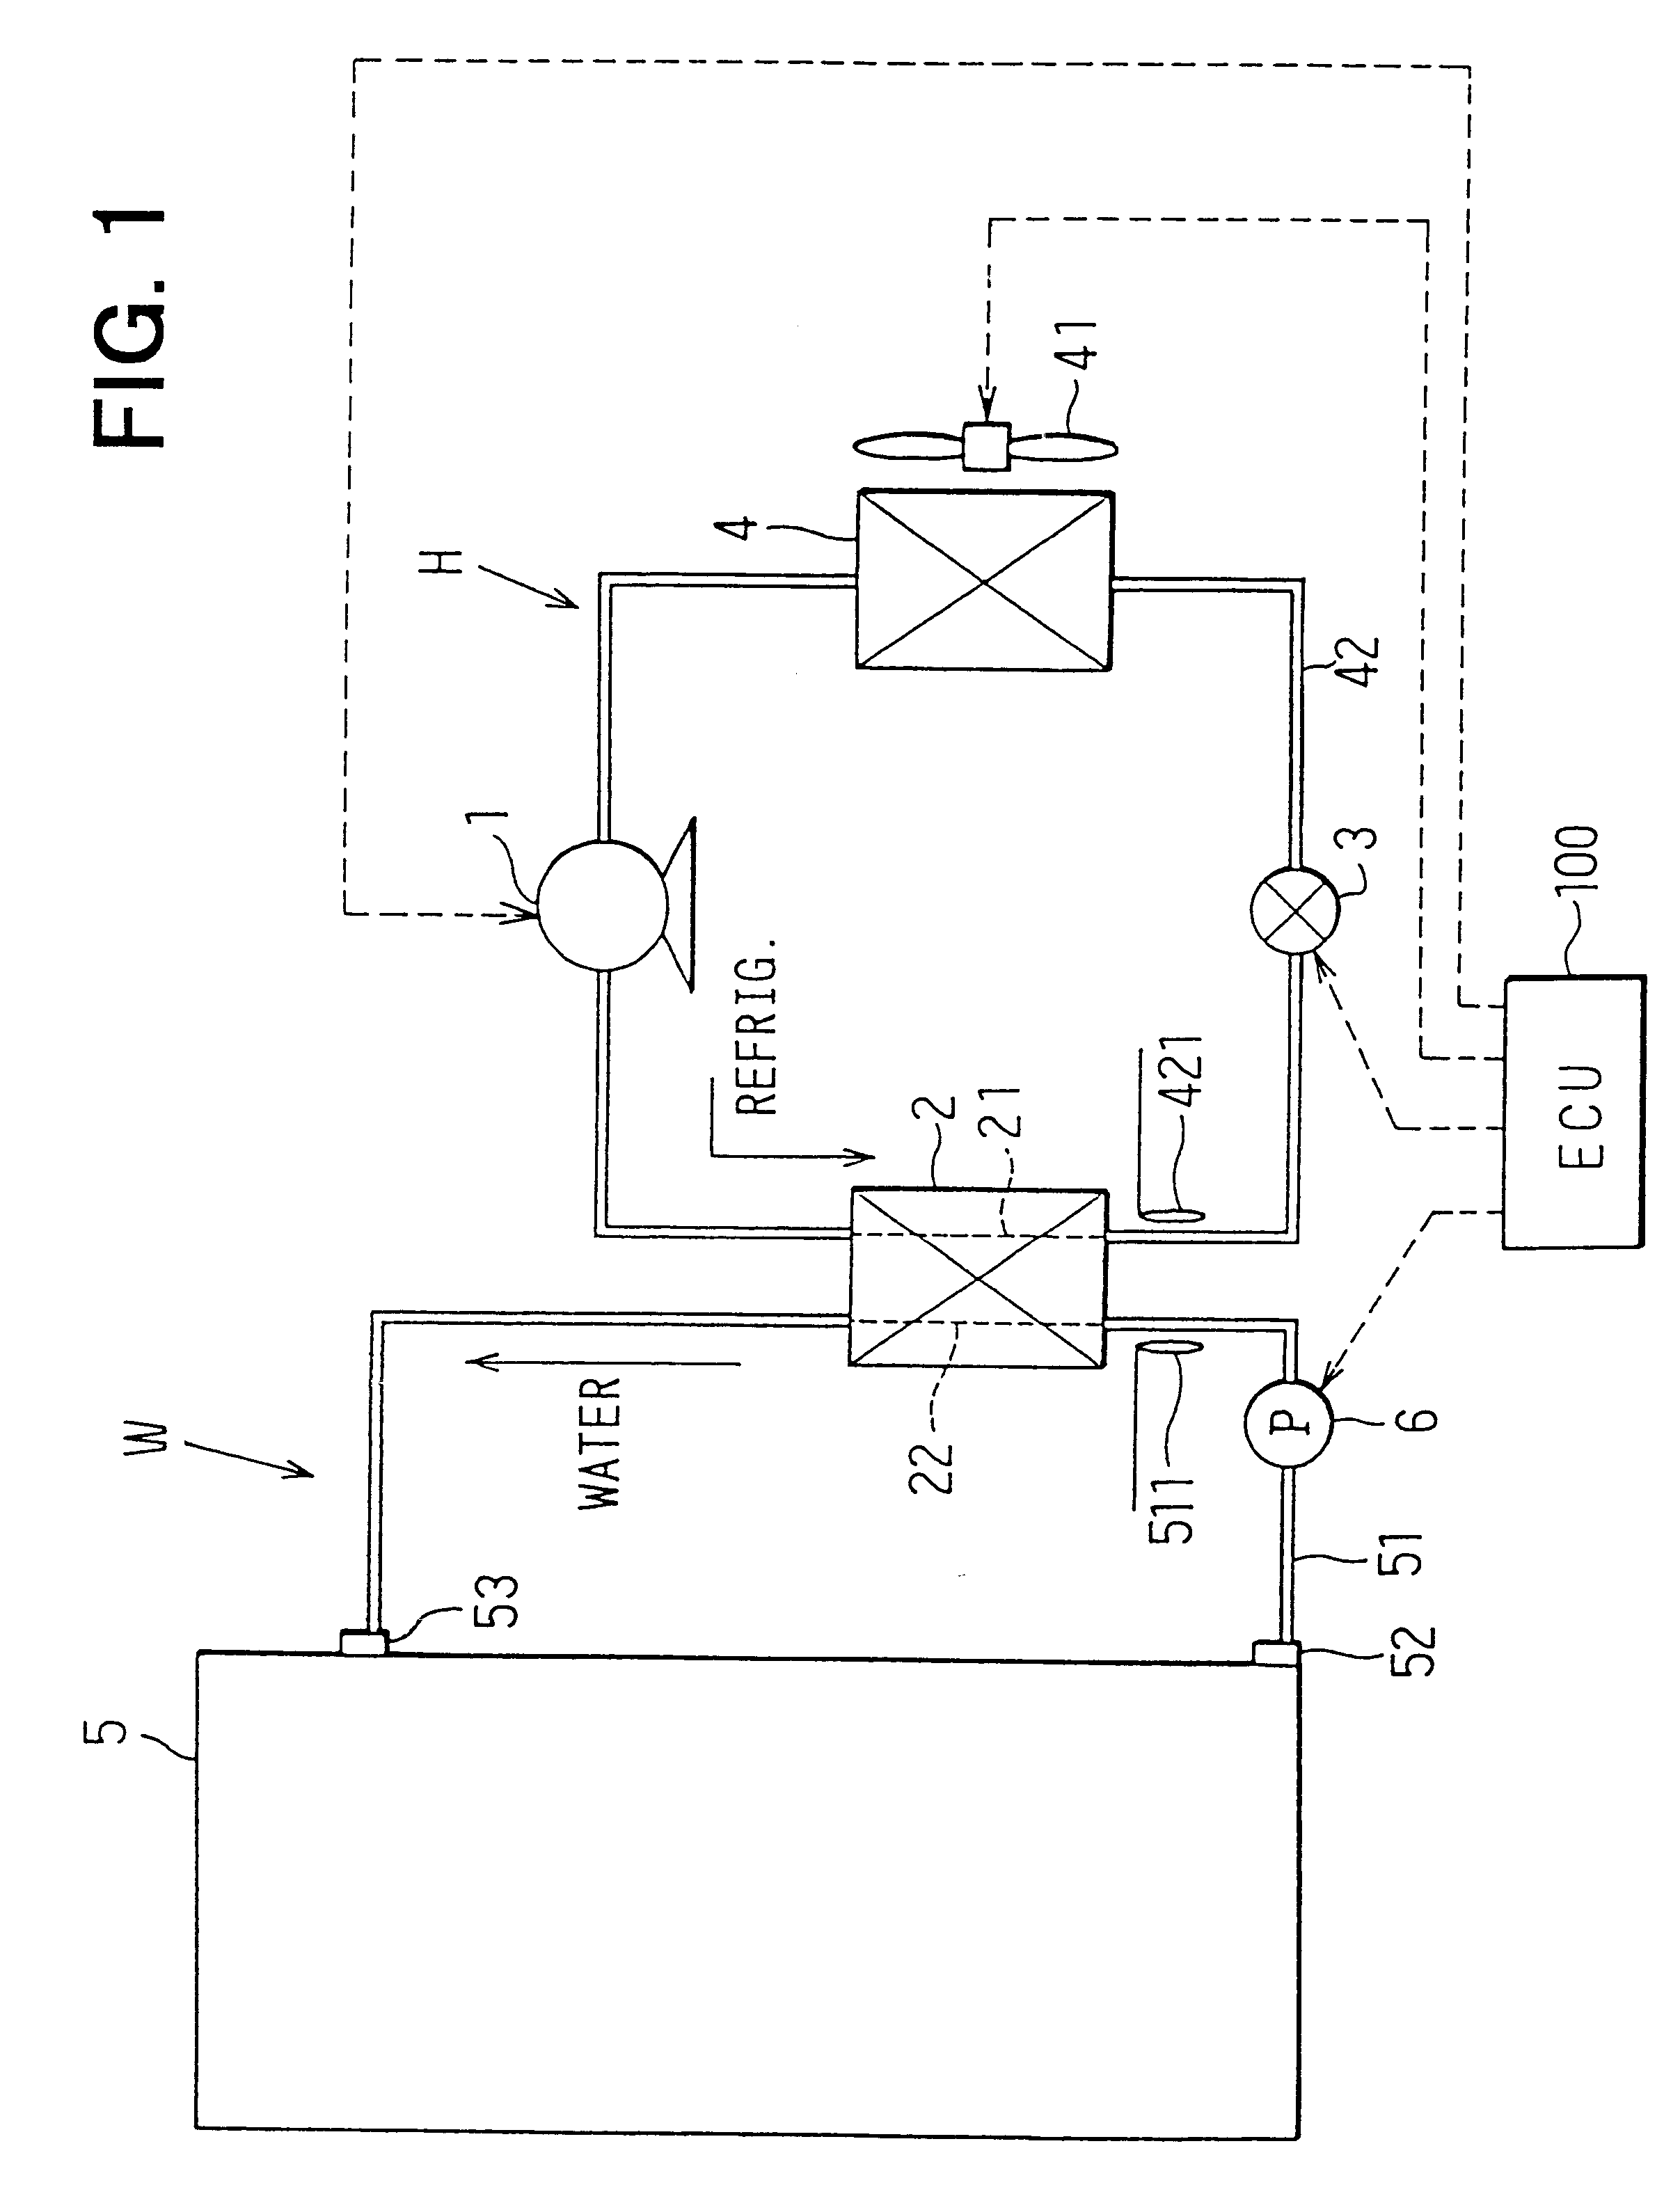 Hot-water supply system with heat pump cycle